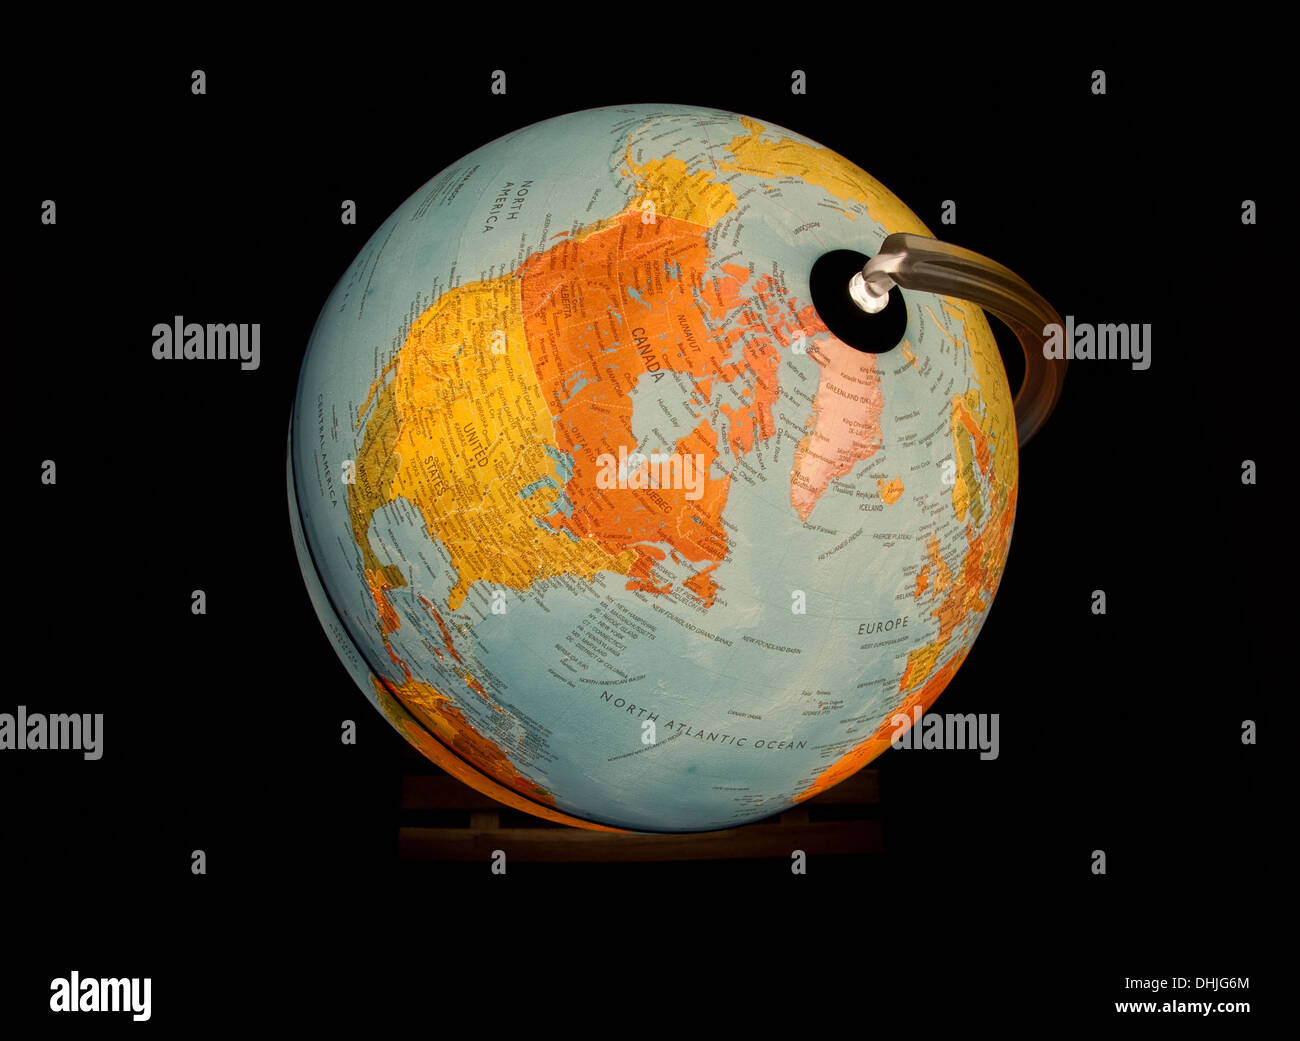 A view of North America and the North Atlantic Ocean on a beautiful, illuminated globe. Stock Photo